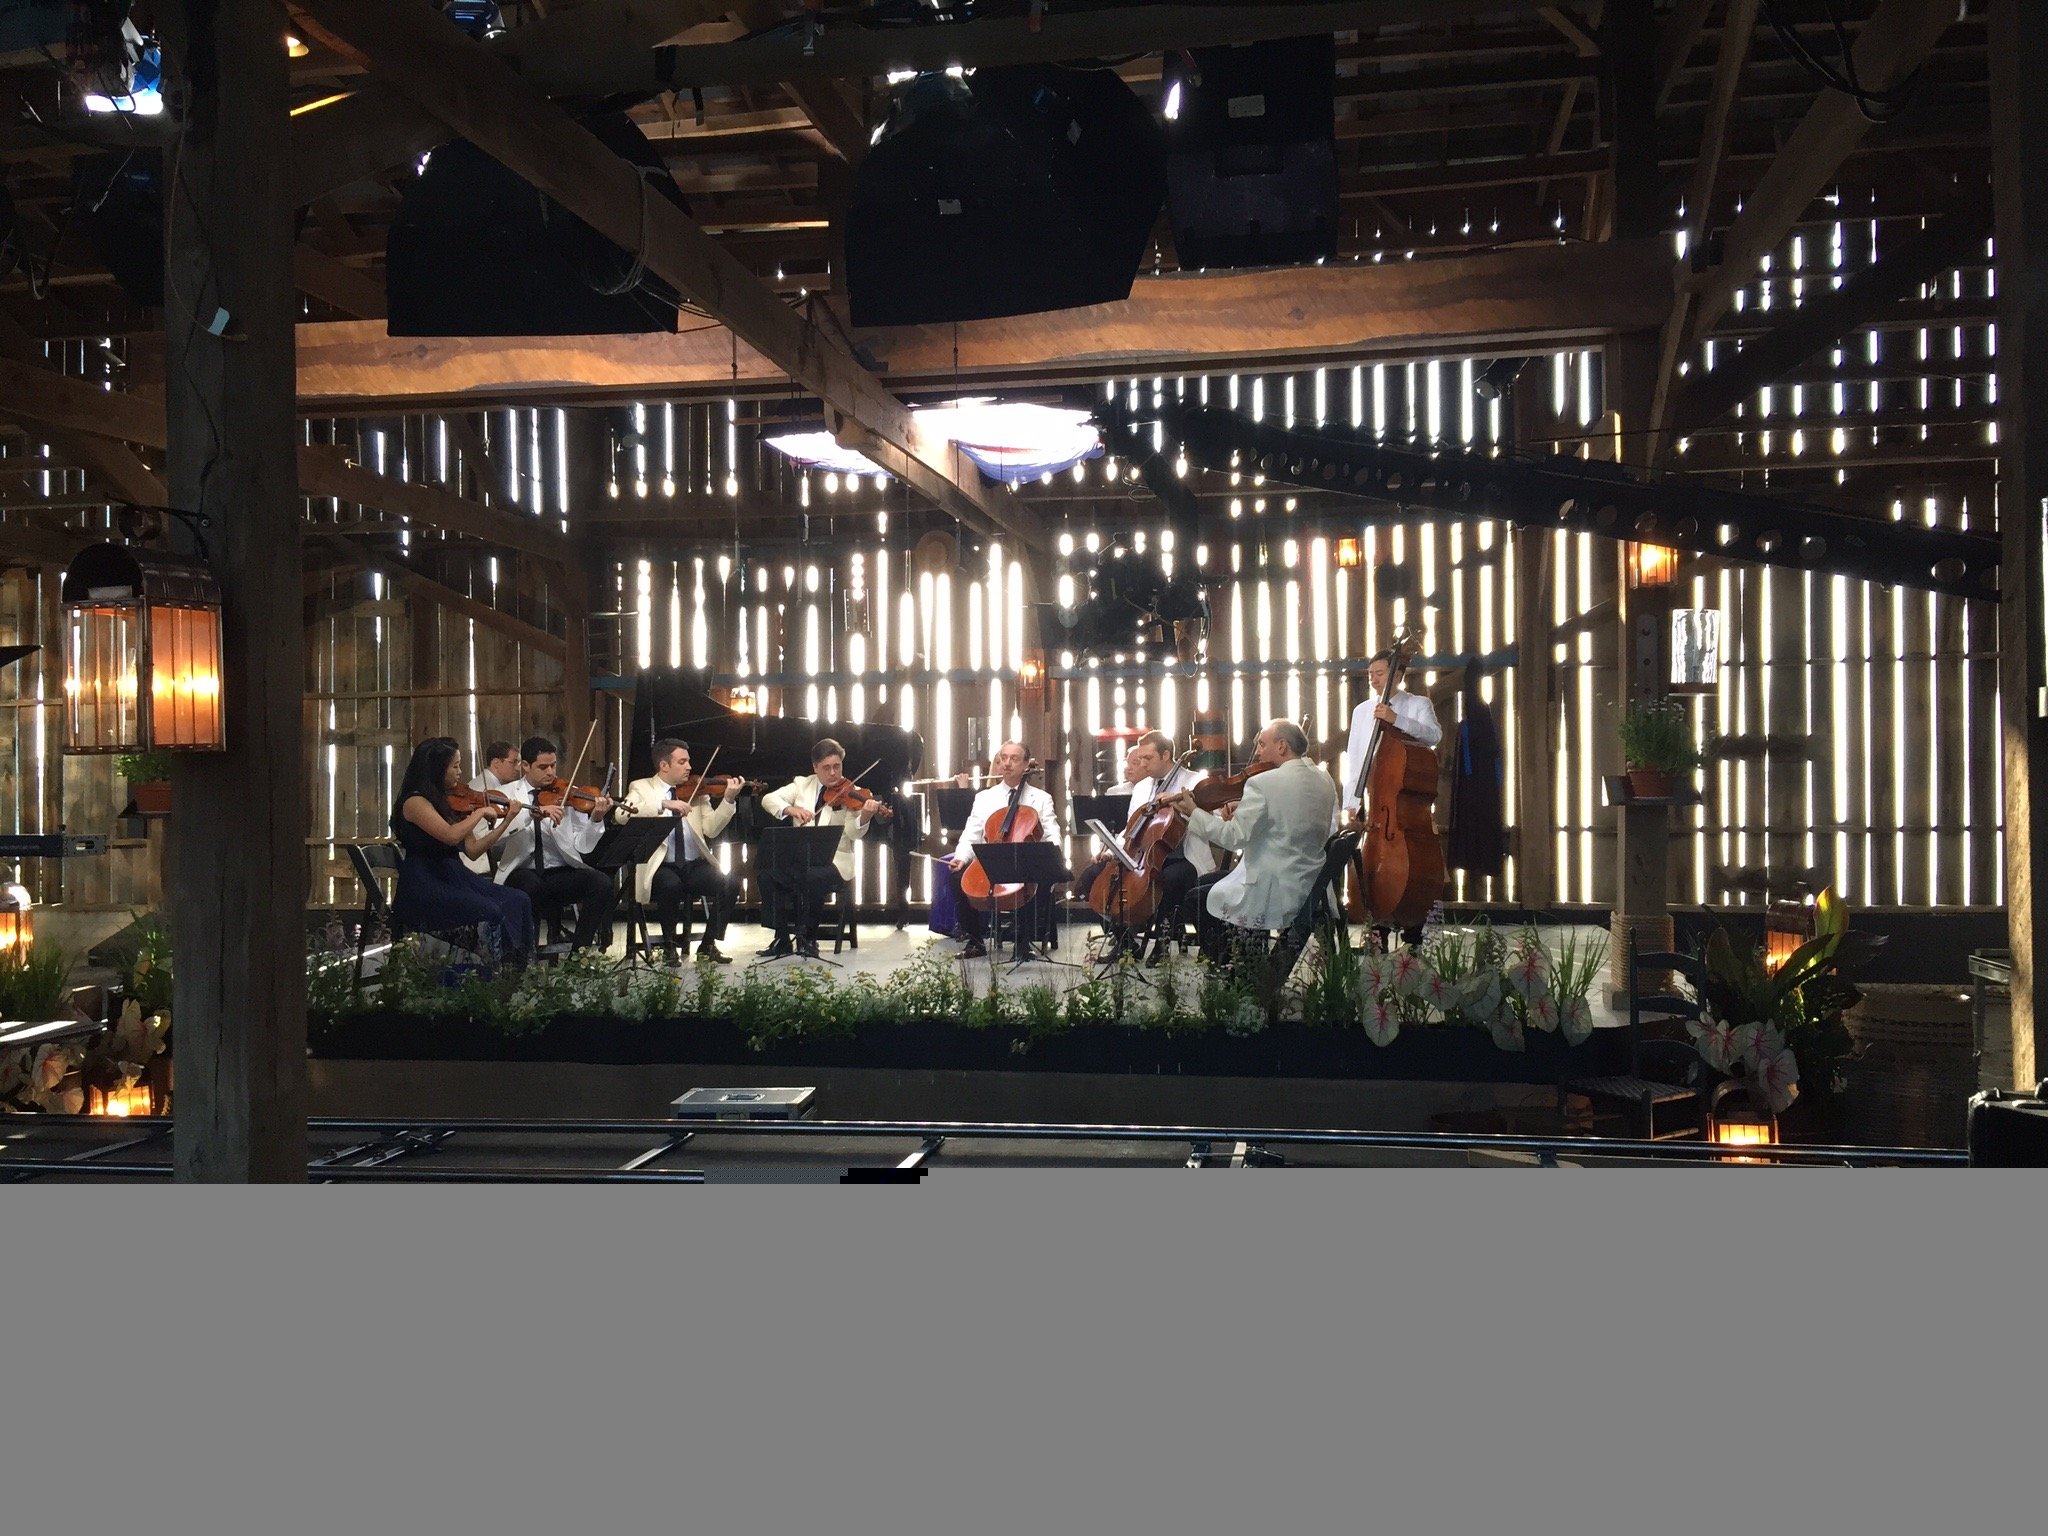 Live from lincoln center chamber orchestra tobacco barn shaker village Kentucky.jpg